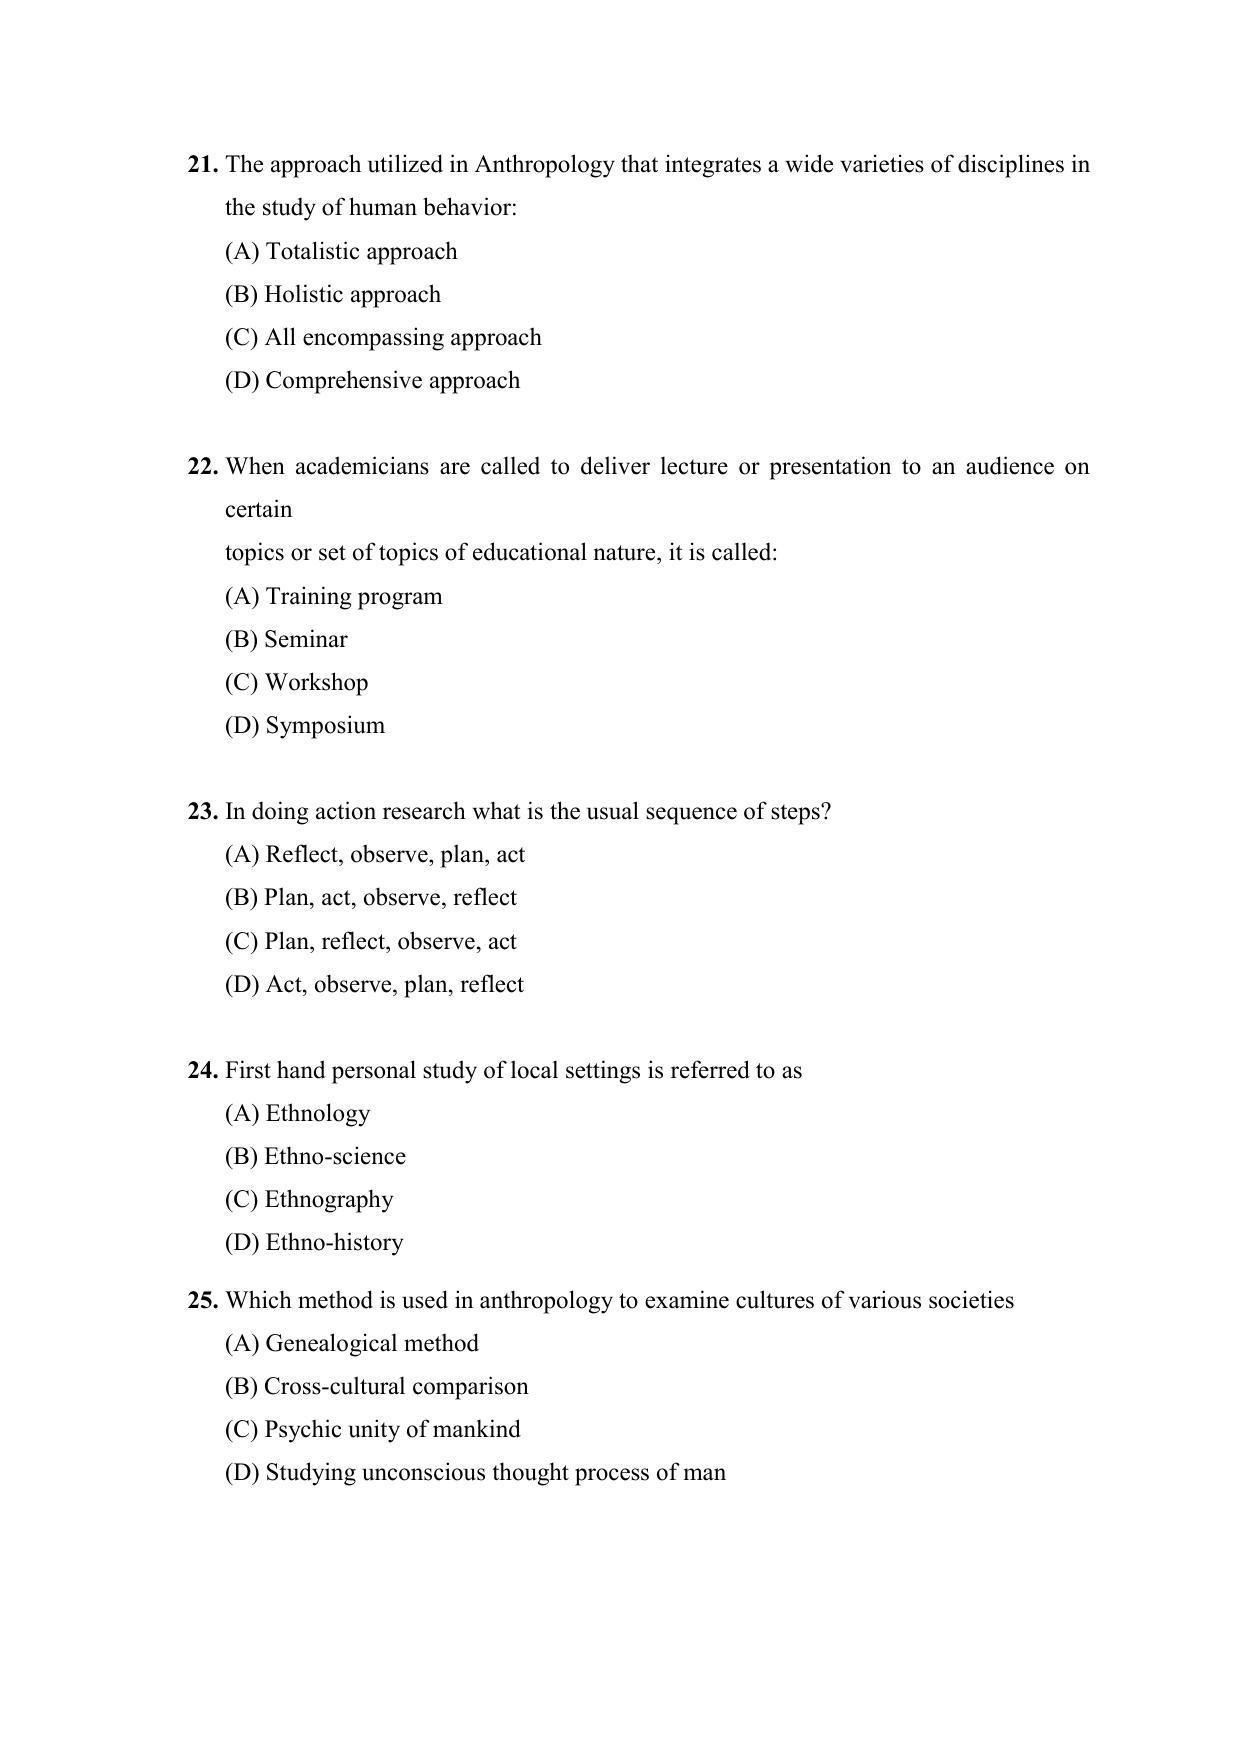 PU MPET Anthropology 2022 Question Papers - Page 5